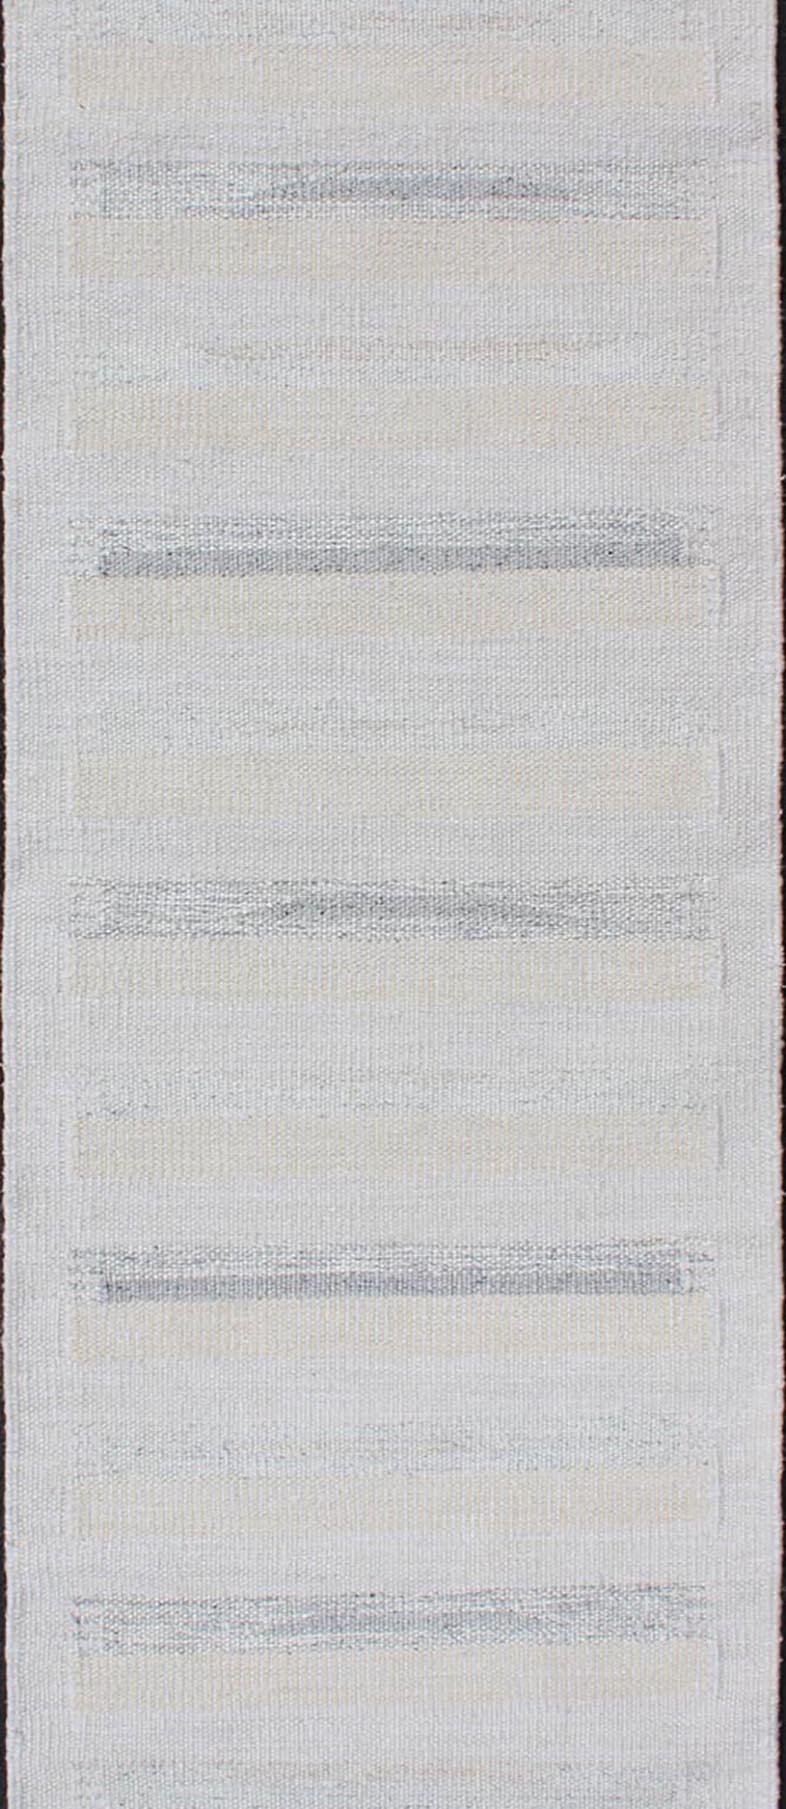 Minimalist modern design flat weave rug with stripes in cream, ivory and gray. Rug RJK-18680, country of origin / type: India / Scandinavian flat-weave.

Measures: 2'8 x 10'3 

This modern flat-weave style is inspired by the work of modern